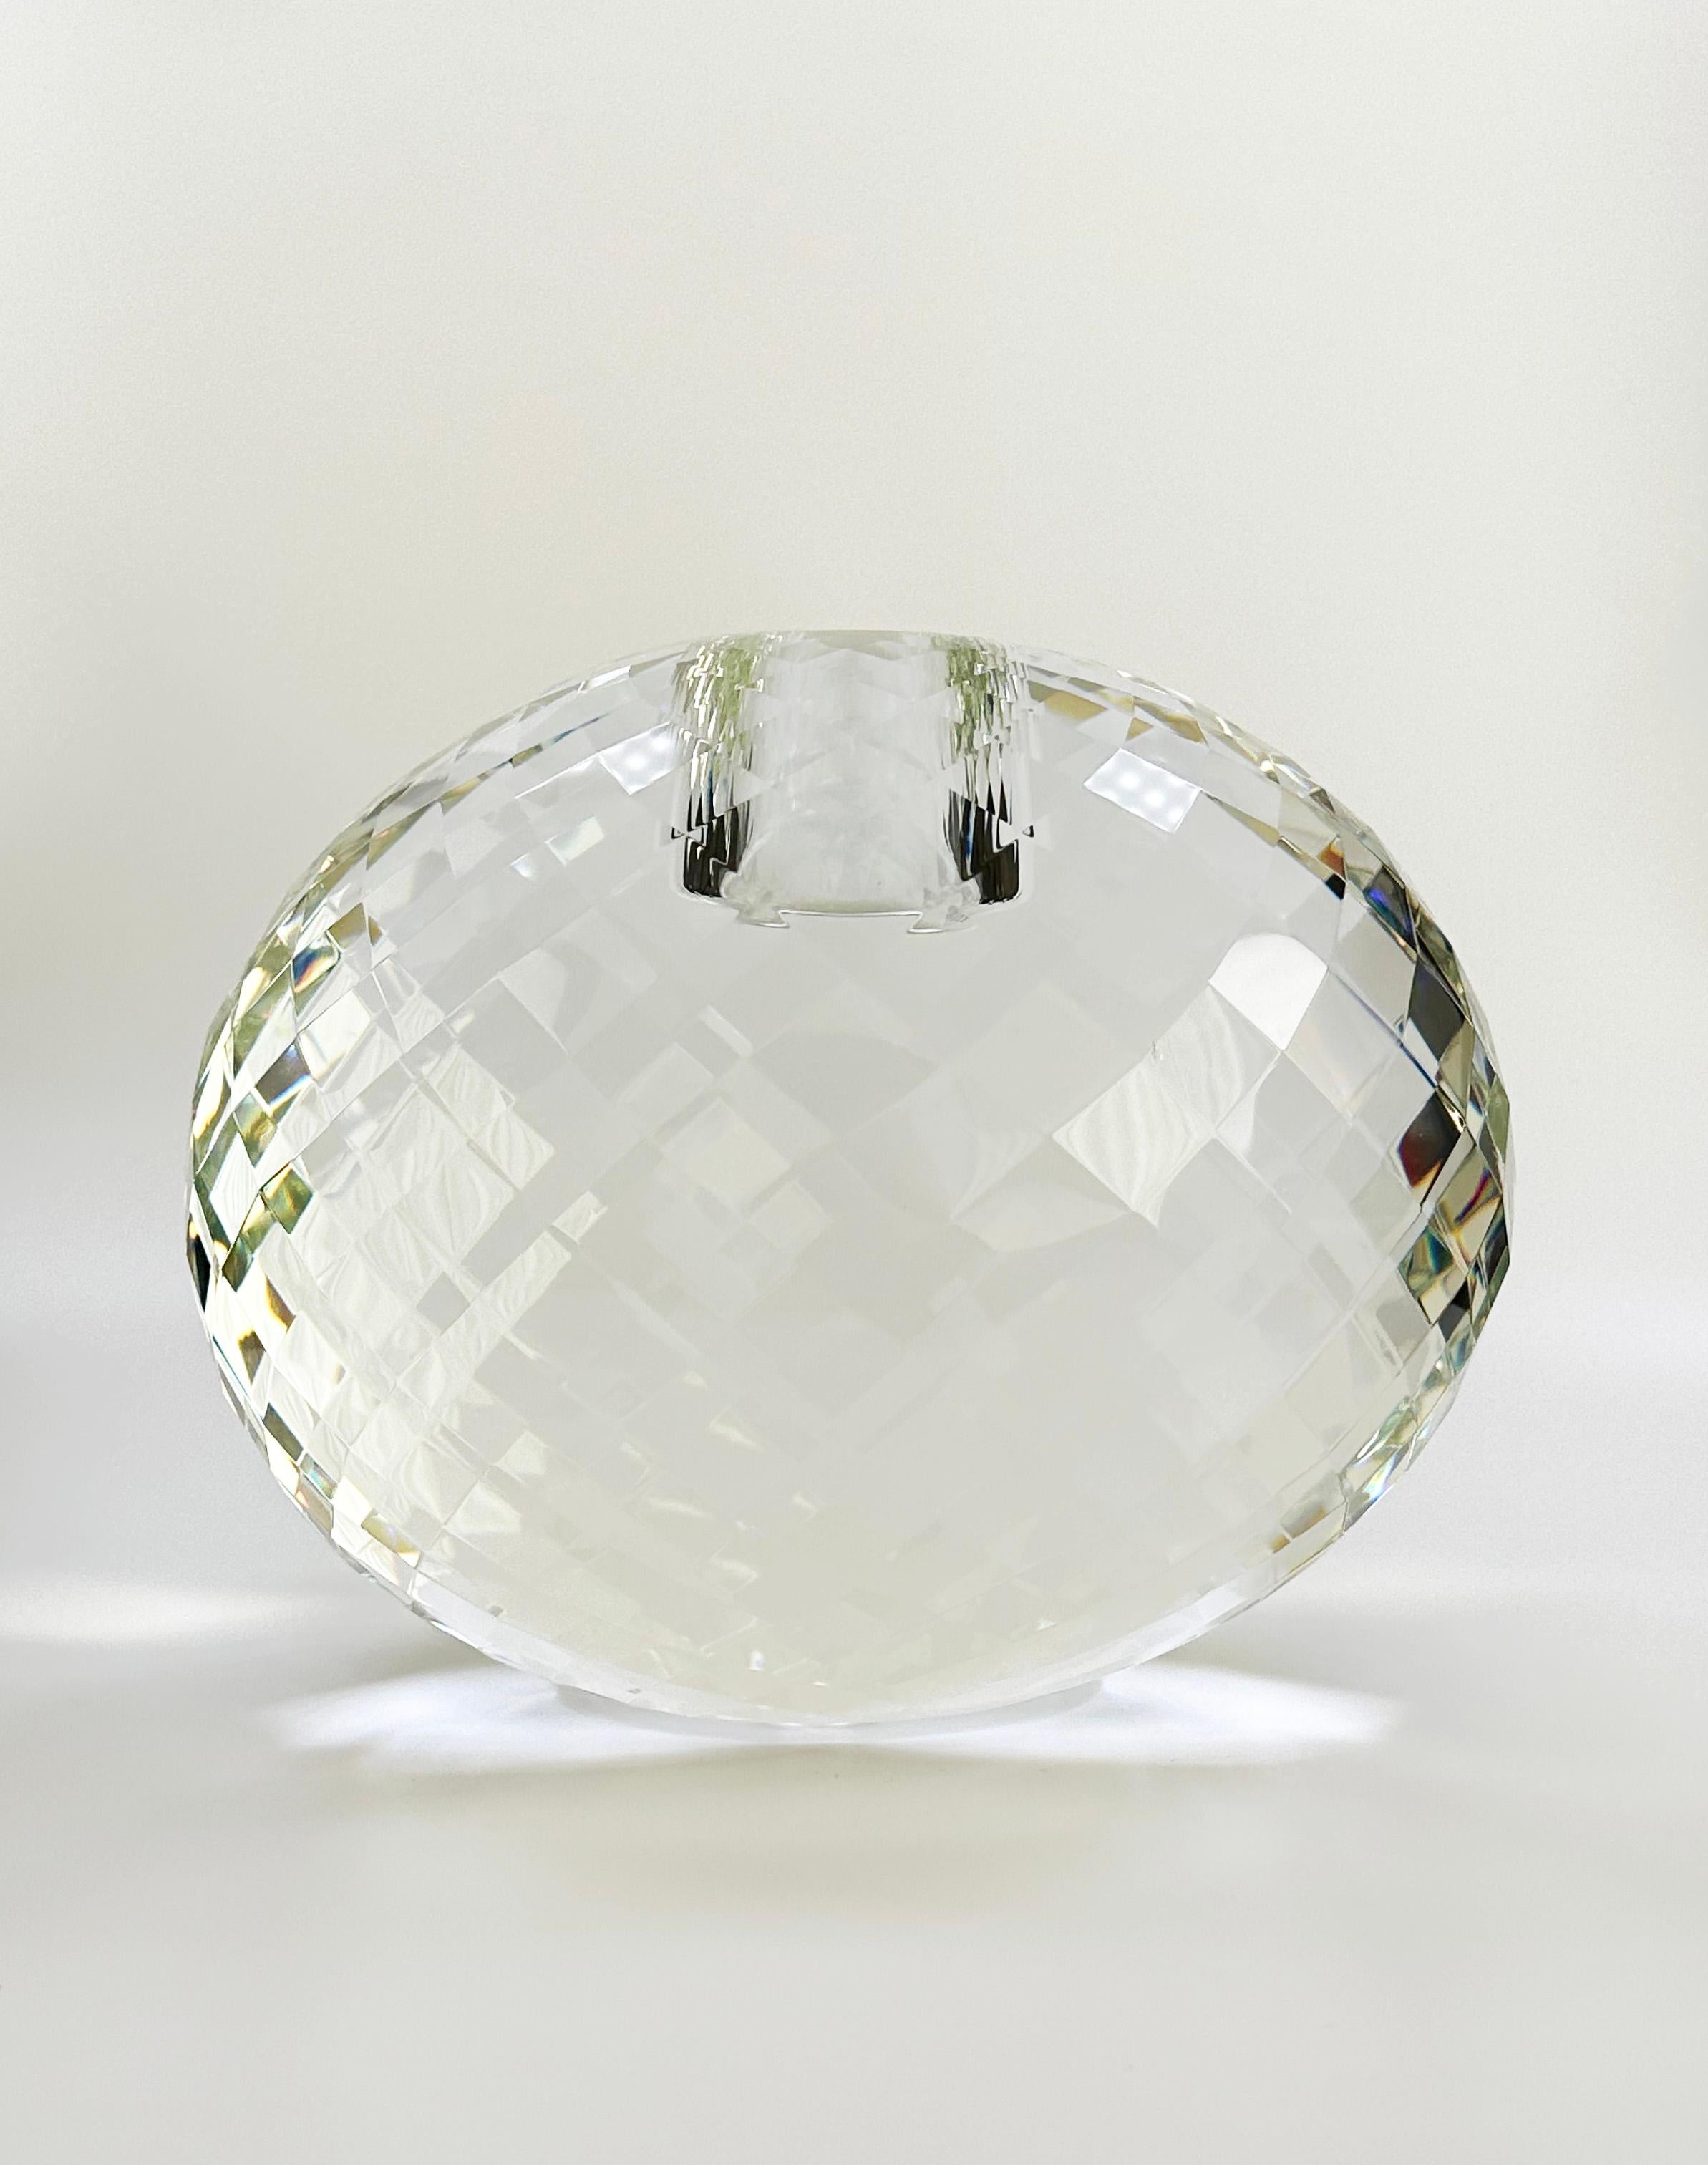 Crystal Veritas Home Sculptural Faceted Votive Candle Holder in Clear Optical Art Glass 